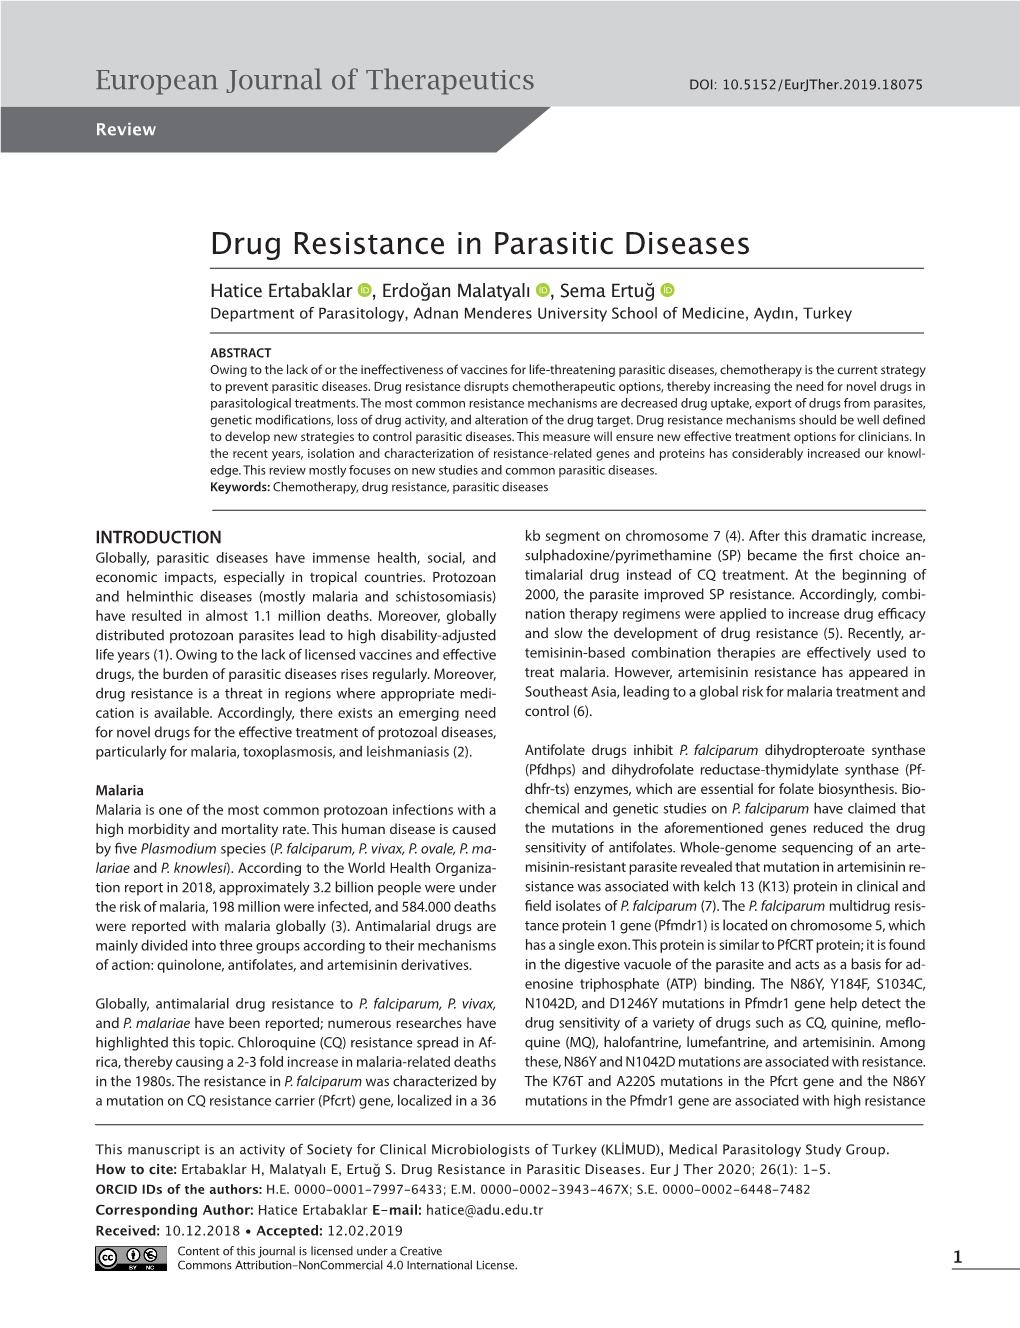 Drug Resistance in Parasitic Diseases